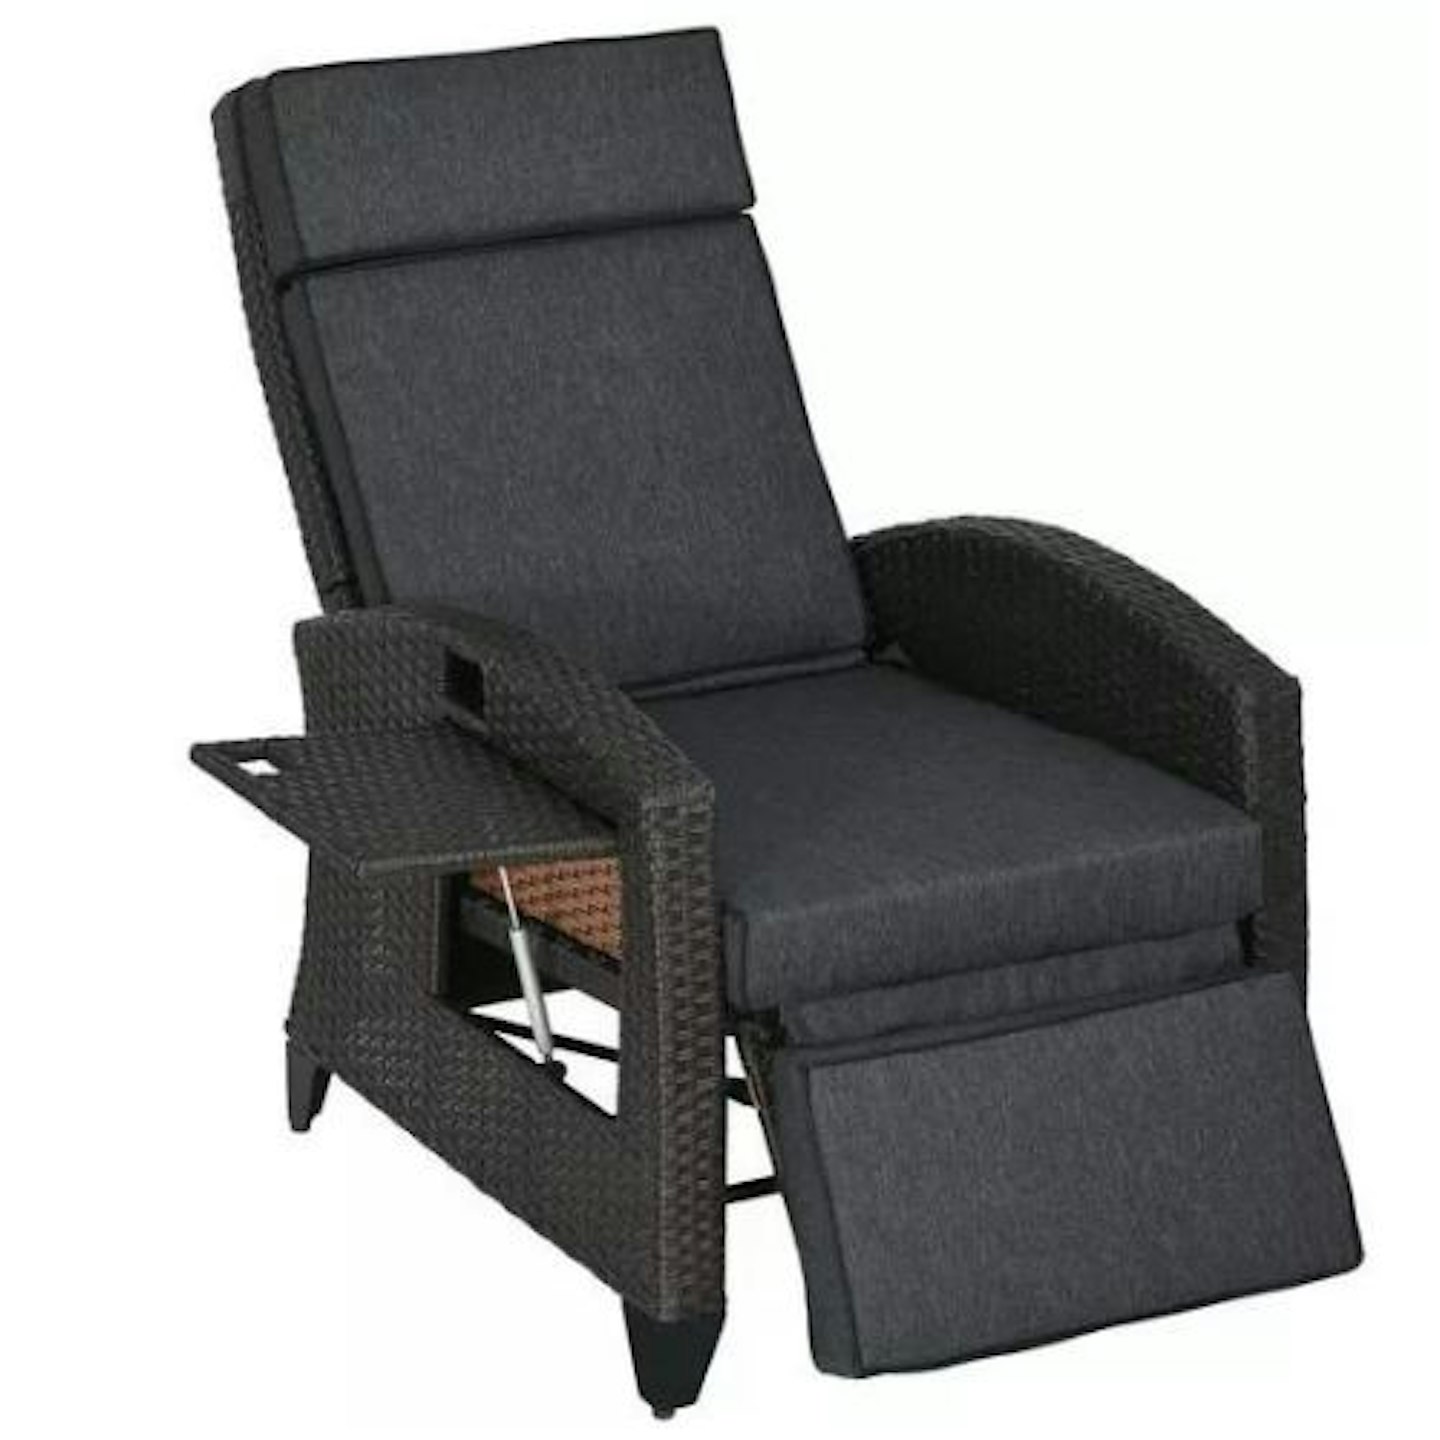 Outsunny Outdoor Recliner Chair